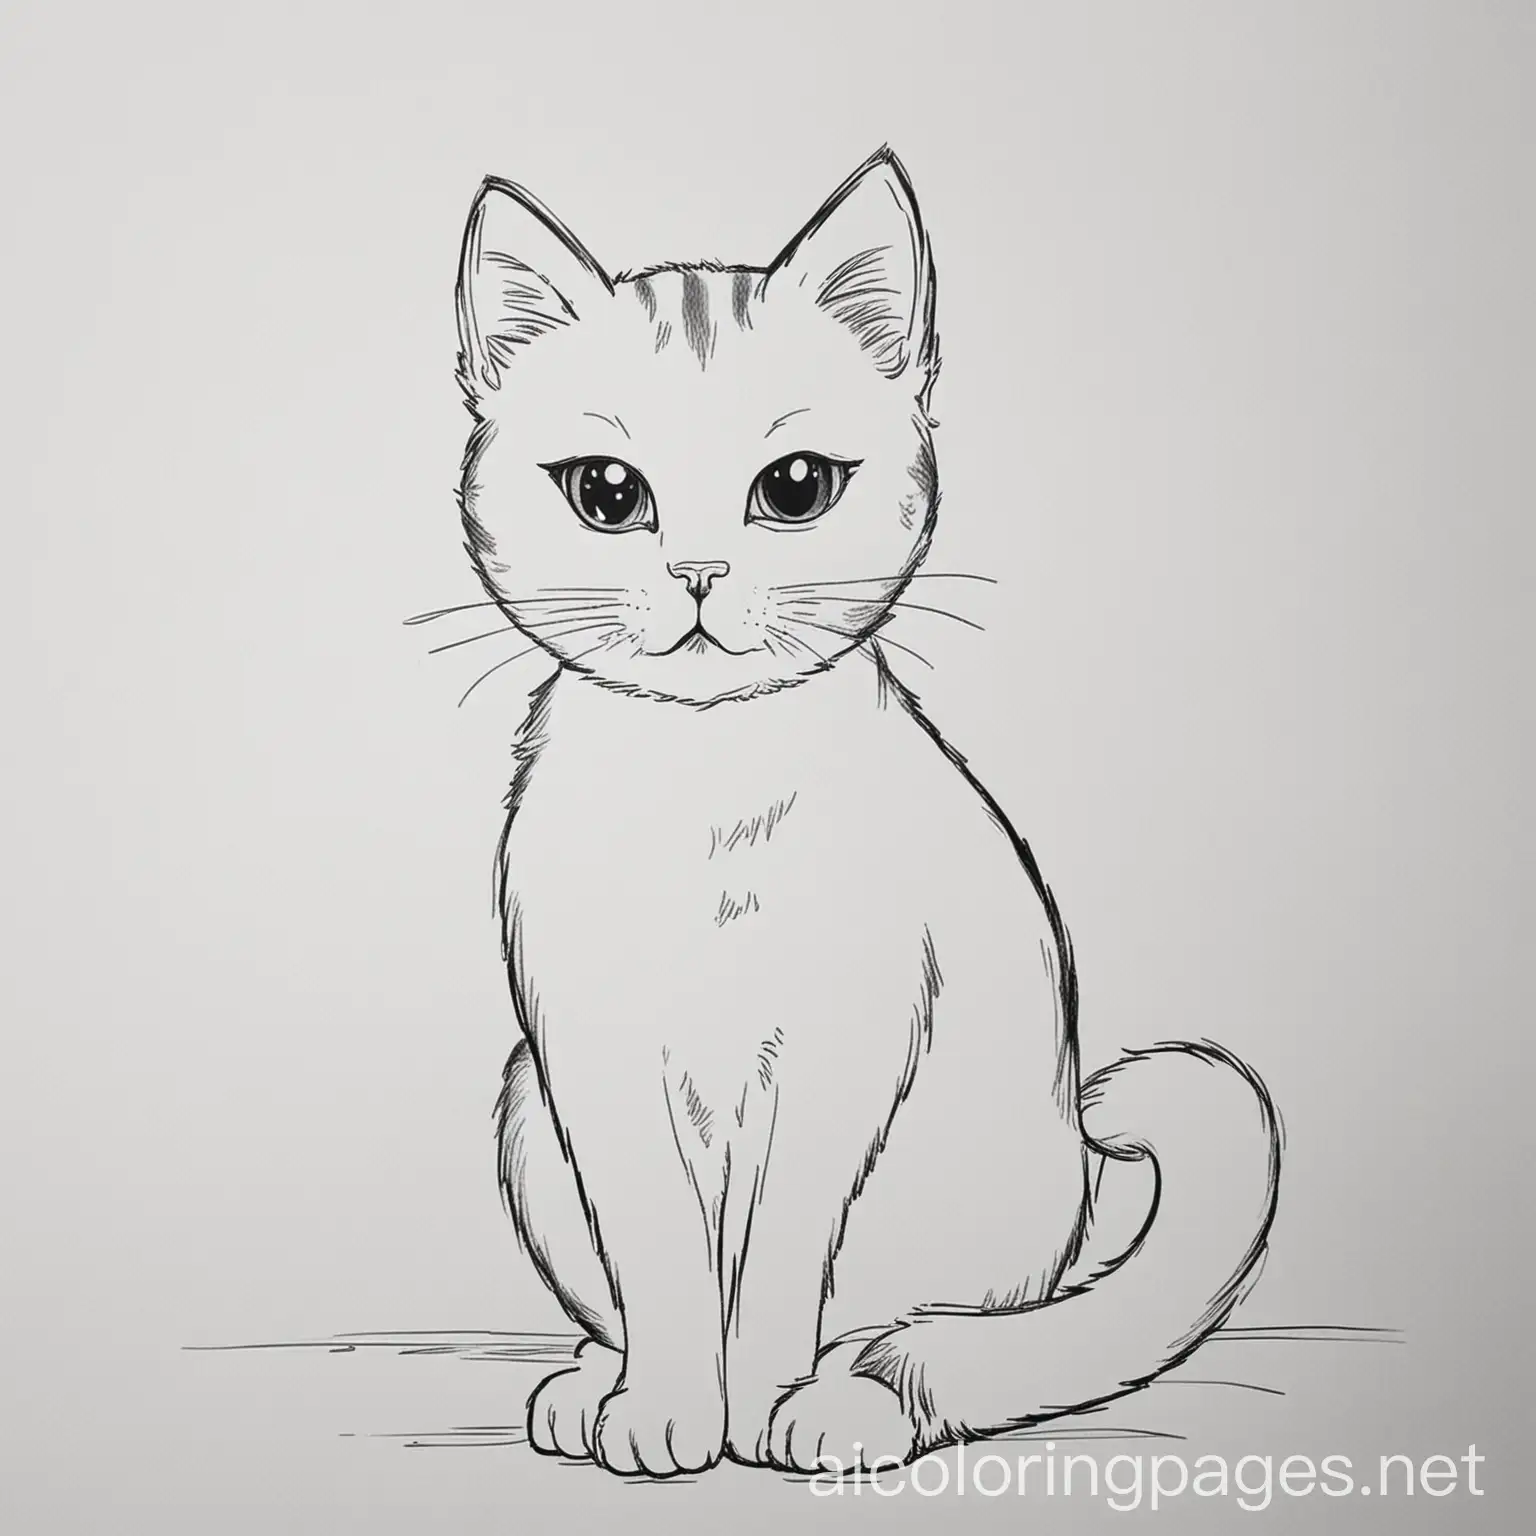 cat coloring pages, Coloring Page, black and white, line art, white background, Simplicity, Ample White Space. The background of the coloring page is plain white to make it easy for young children to color within the lines. The outlines of all the subjects are easy to distinguish, making it simple for kids to color without too much difficulty